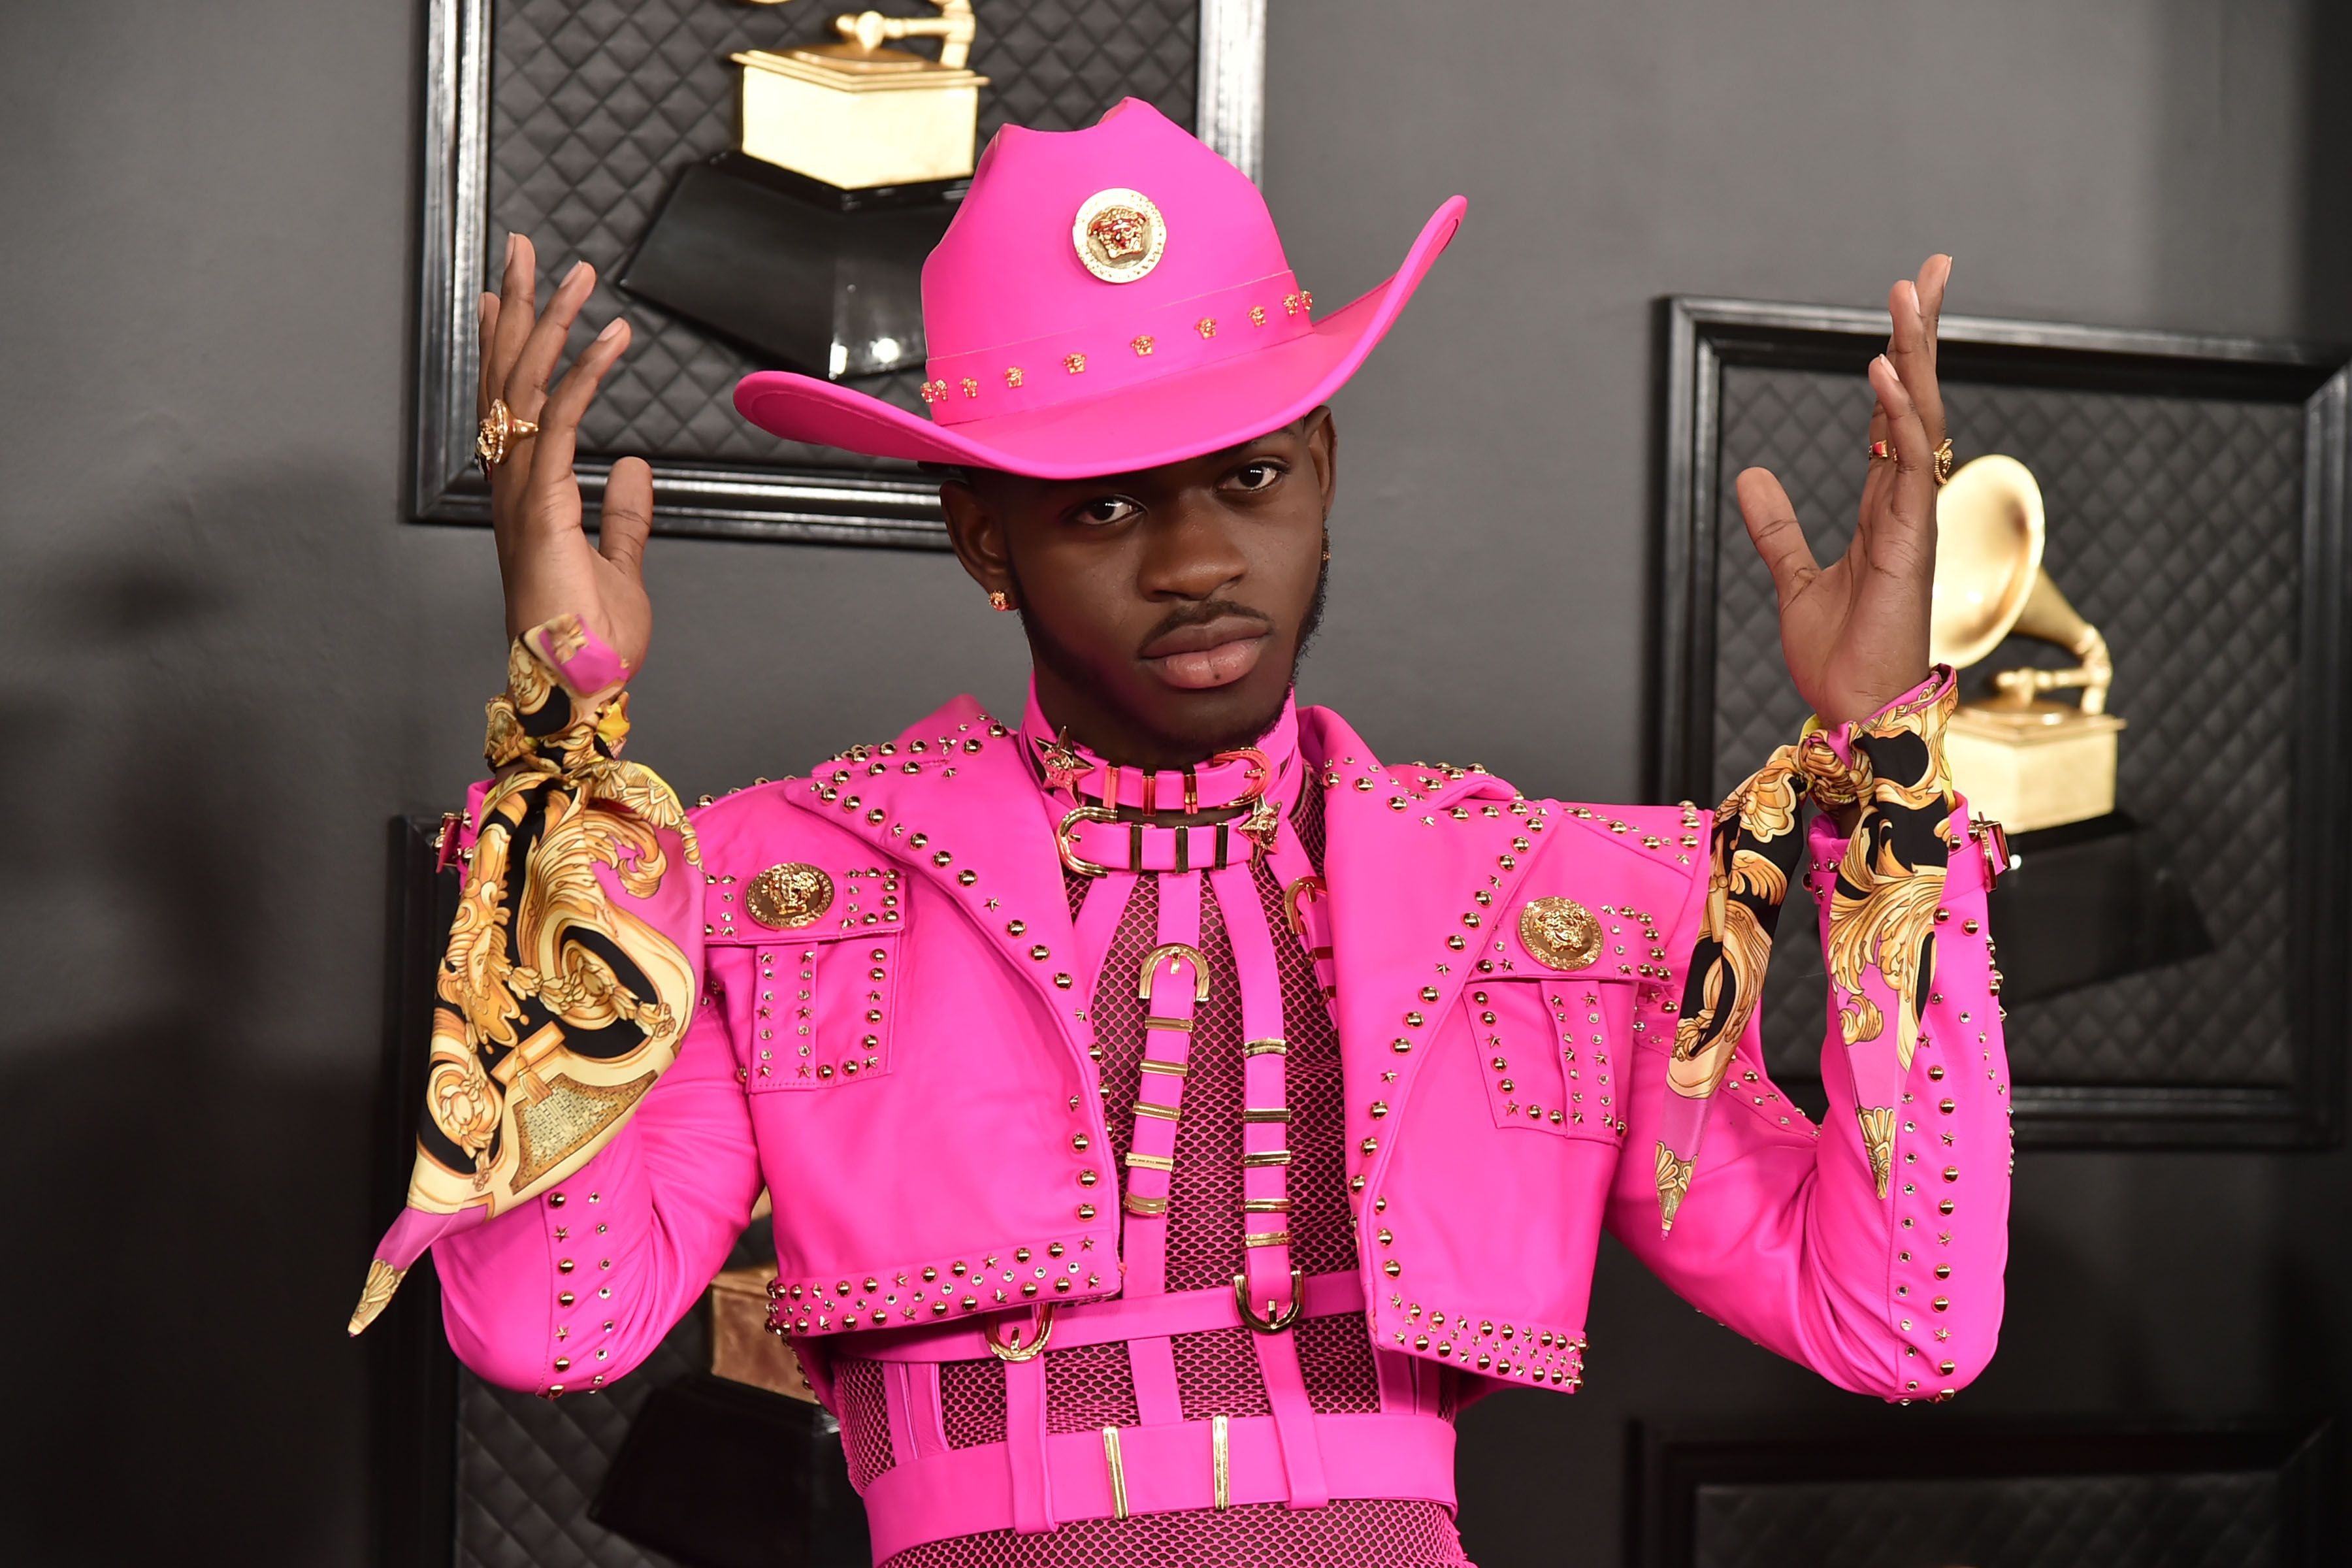 Lil Nas X's Net Worth and “Old Town Road” Money Earned